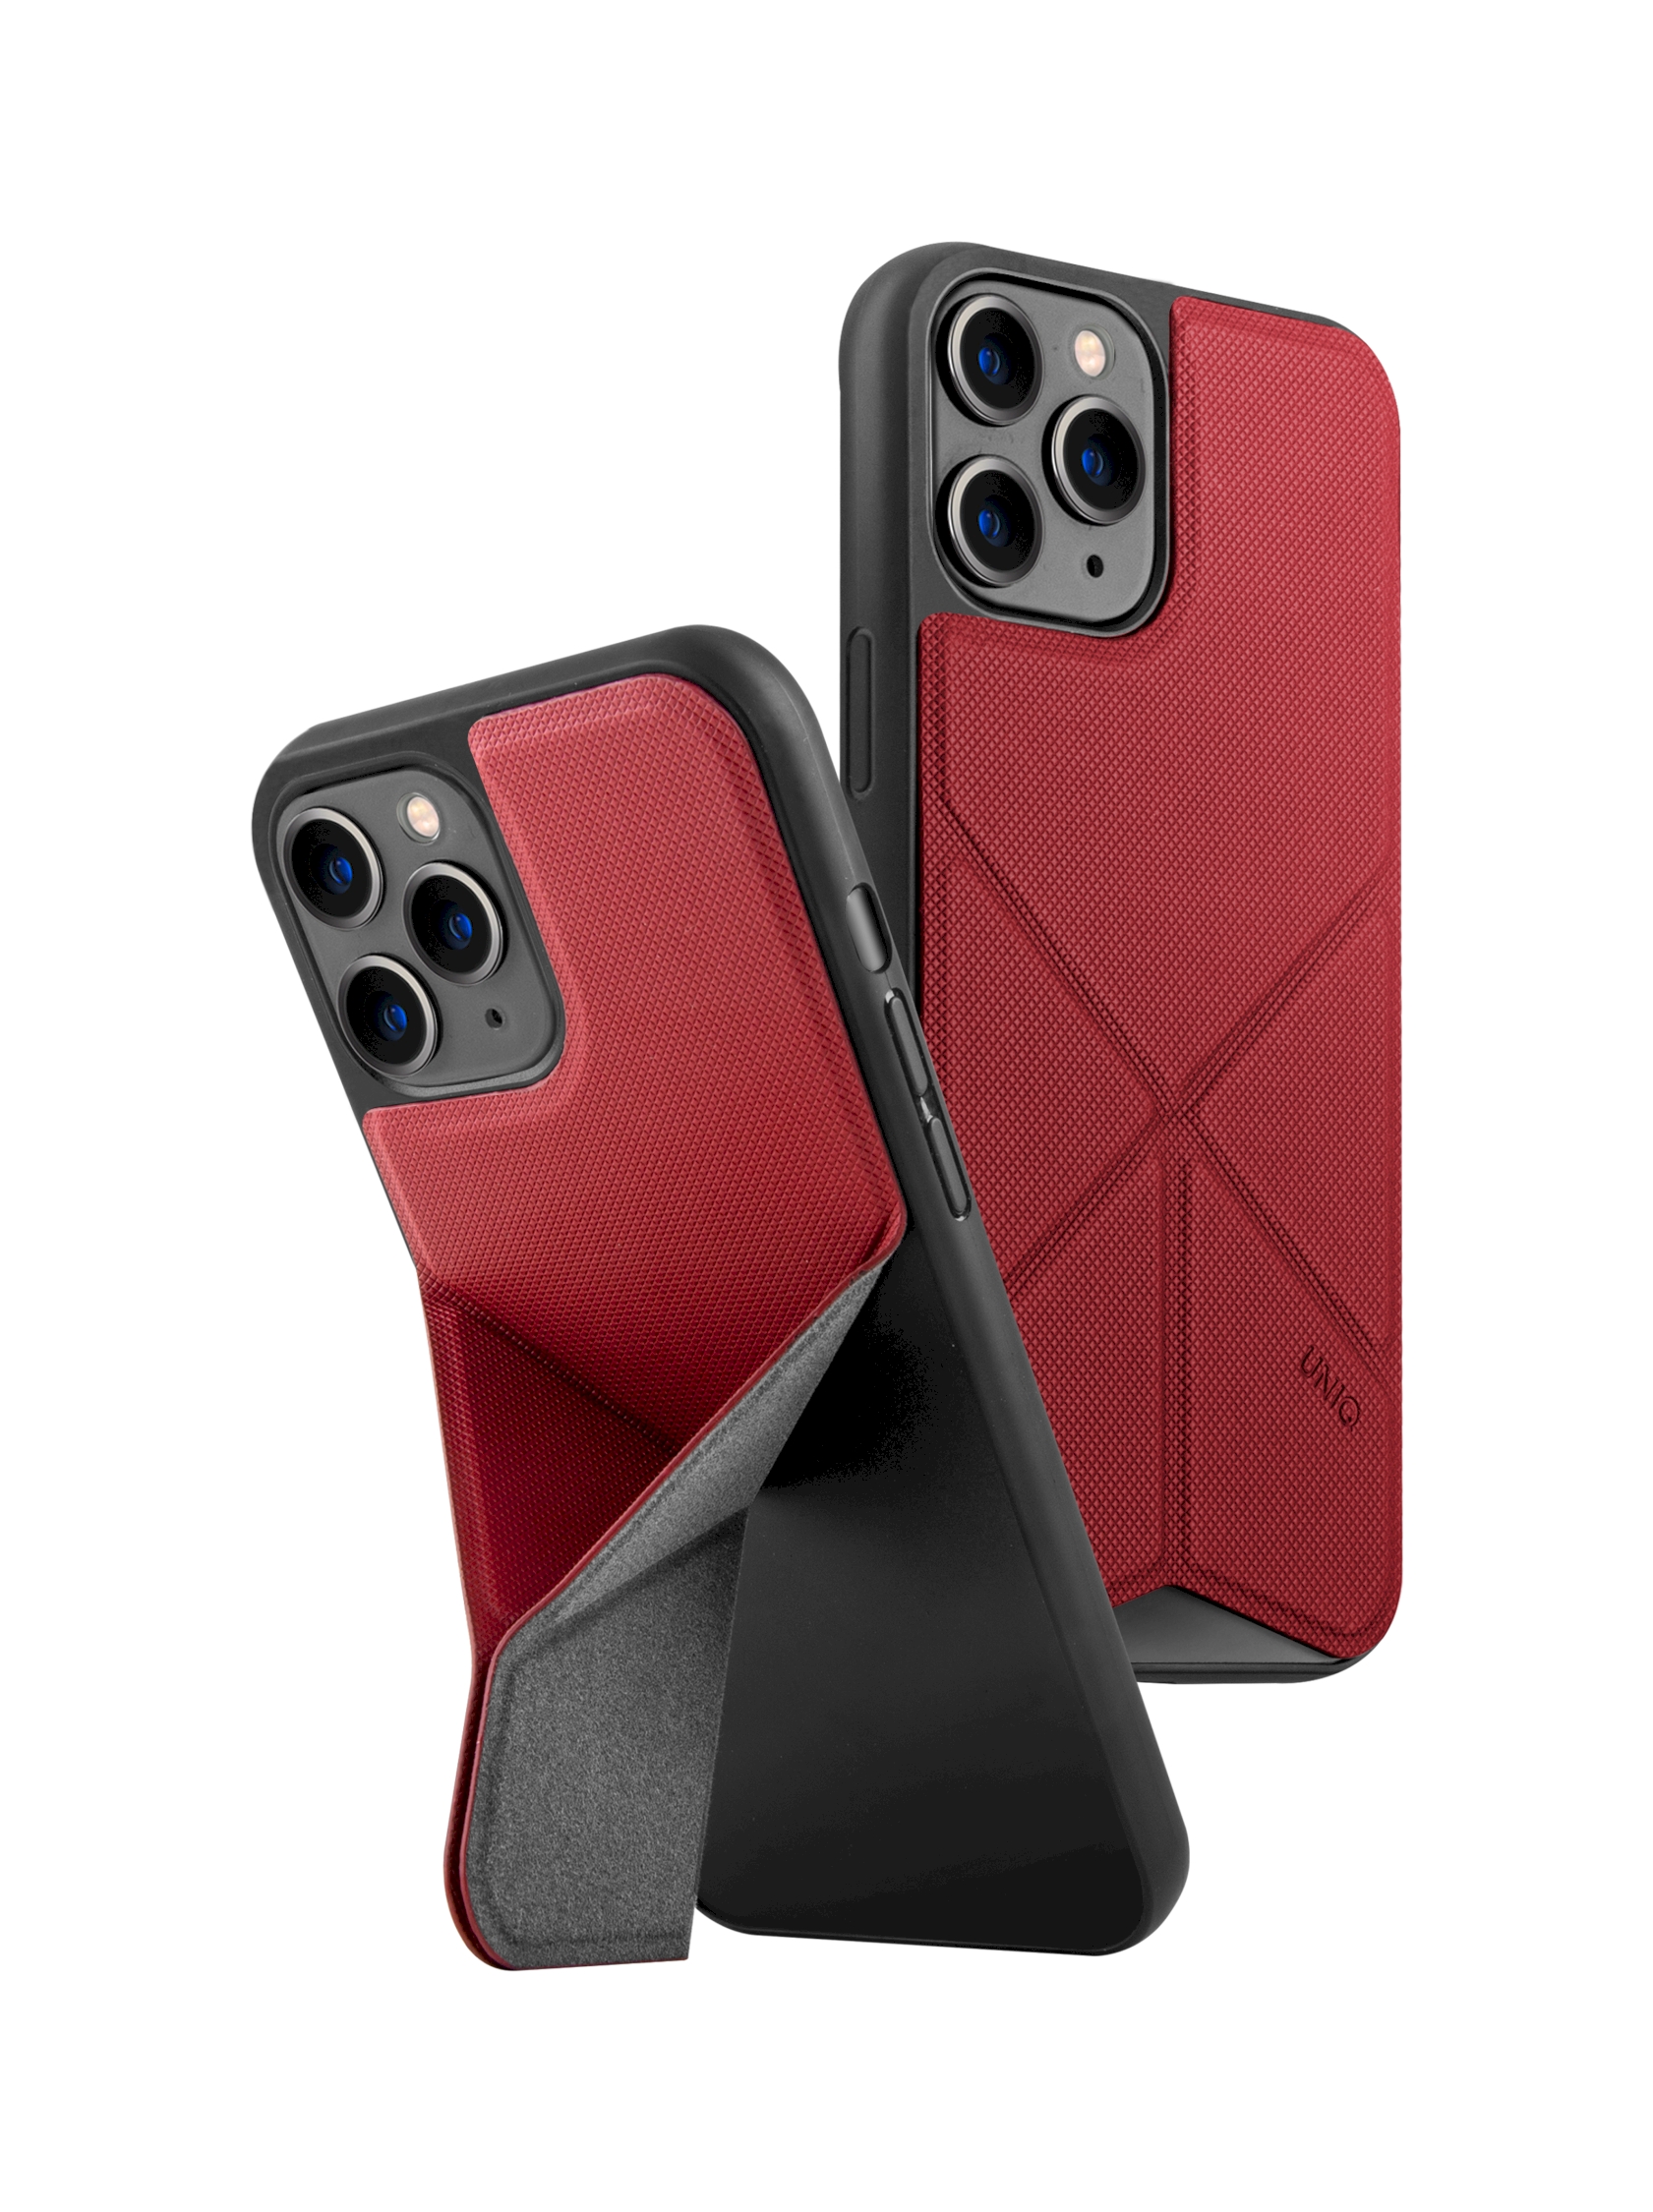 iPhone 12 Pro Max, case transforma, stand up coral, red